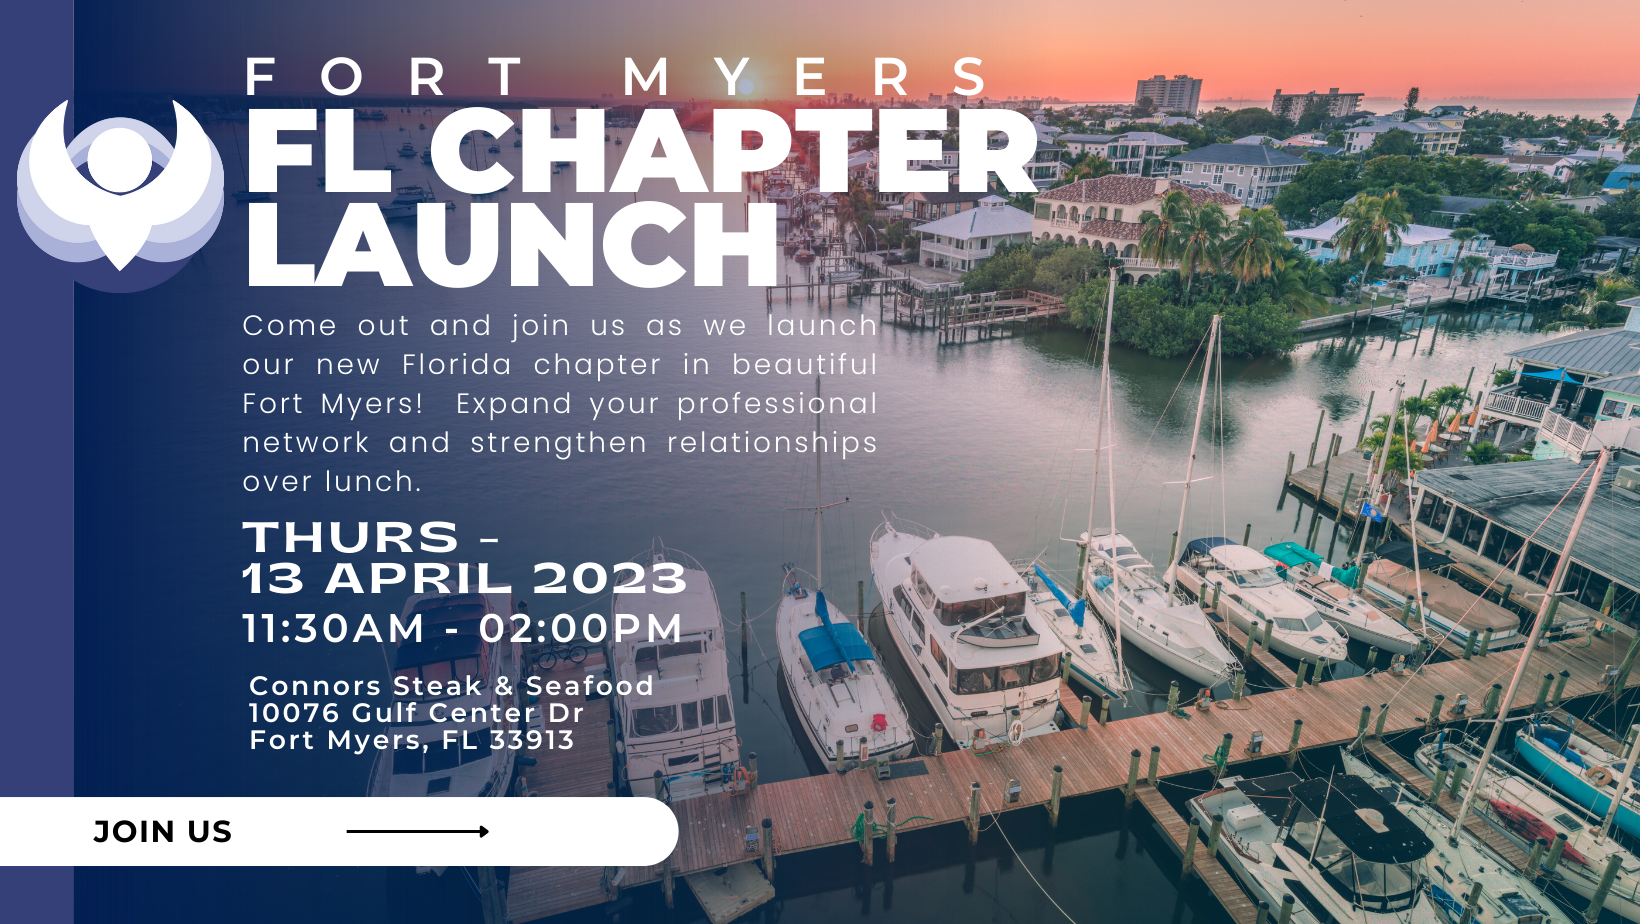 Click to register. Join us for OWL's New Chapter Launch in Fort Myers, Florida! Thurs, April 13th; 11:30 AM; Connor's Steak & Seafood, 10076 Gulf Center Dr | Come out and join us as we launch our new FL chapter in beautiful Fort Myers! Expand your professional network and strengthen relationships over lunch. We'll see you there!